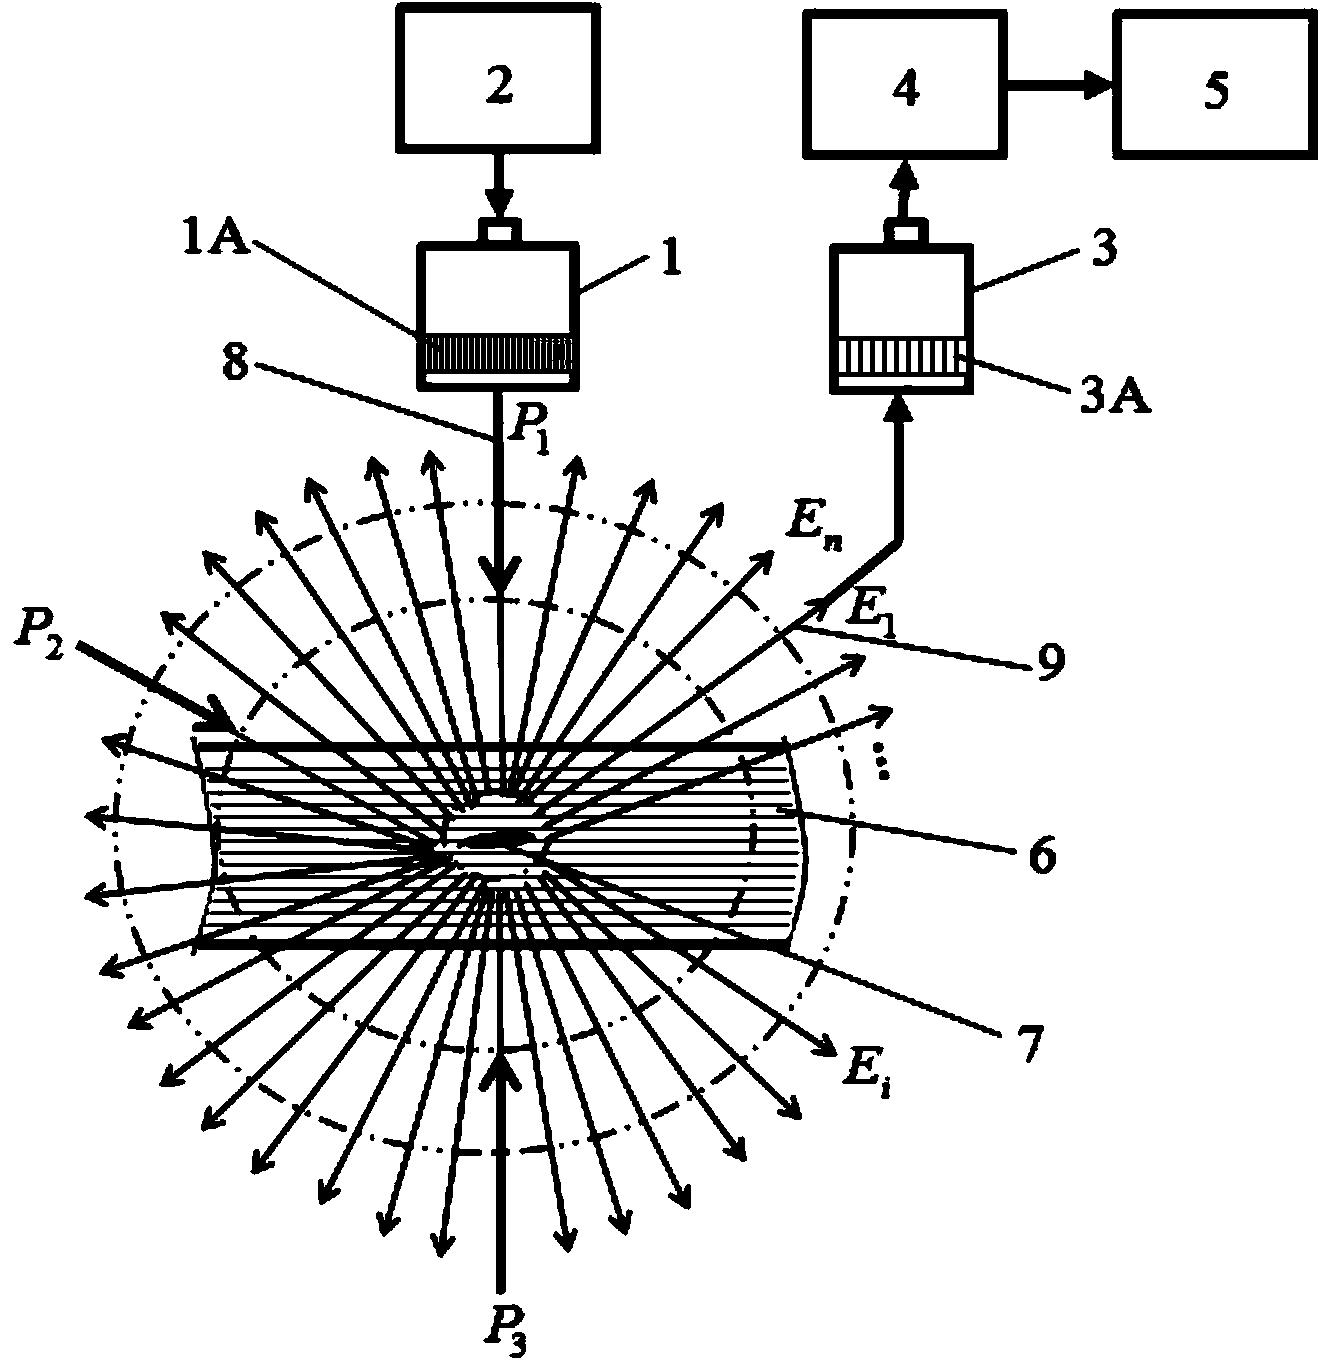 Ultrasonic-acoustic emission detection method for composite material